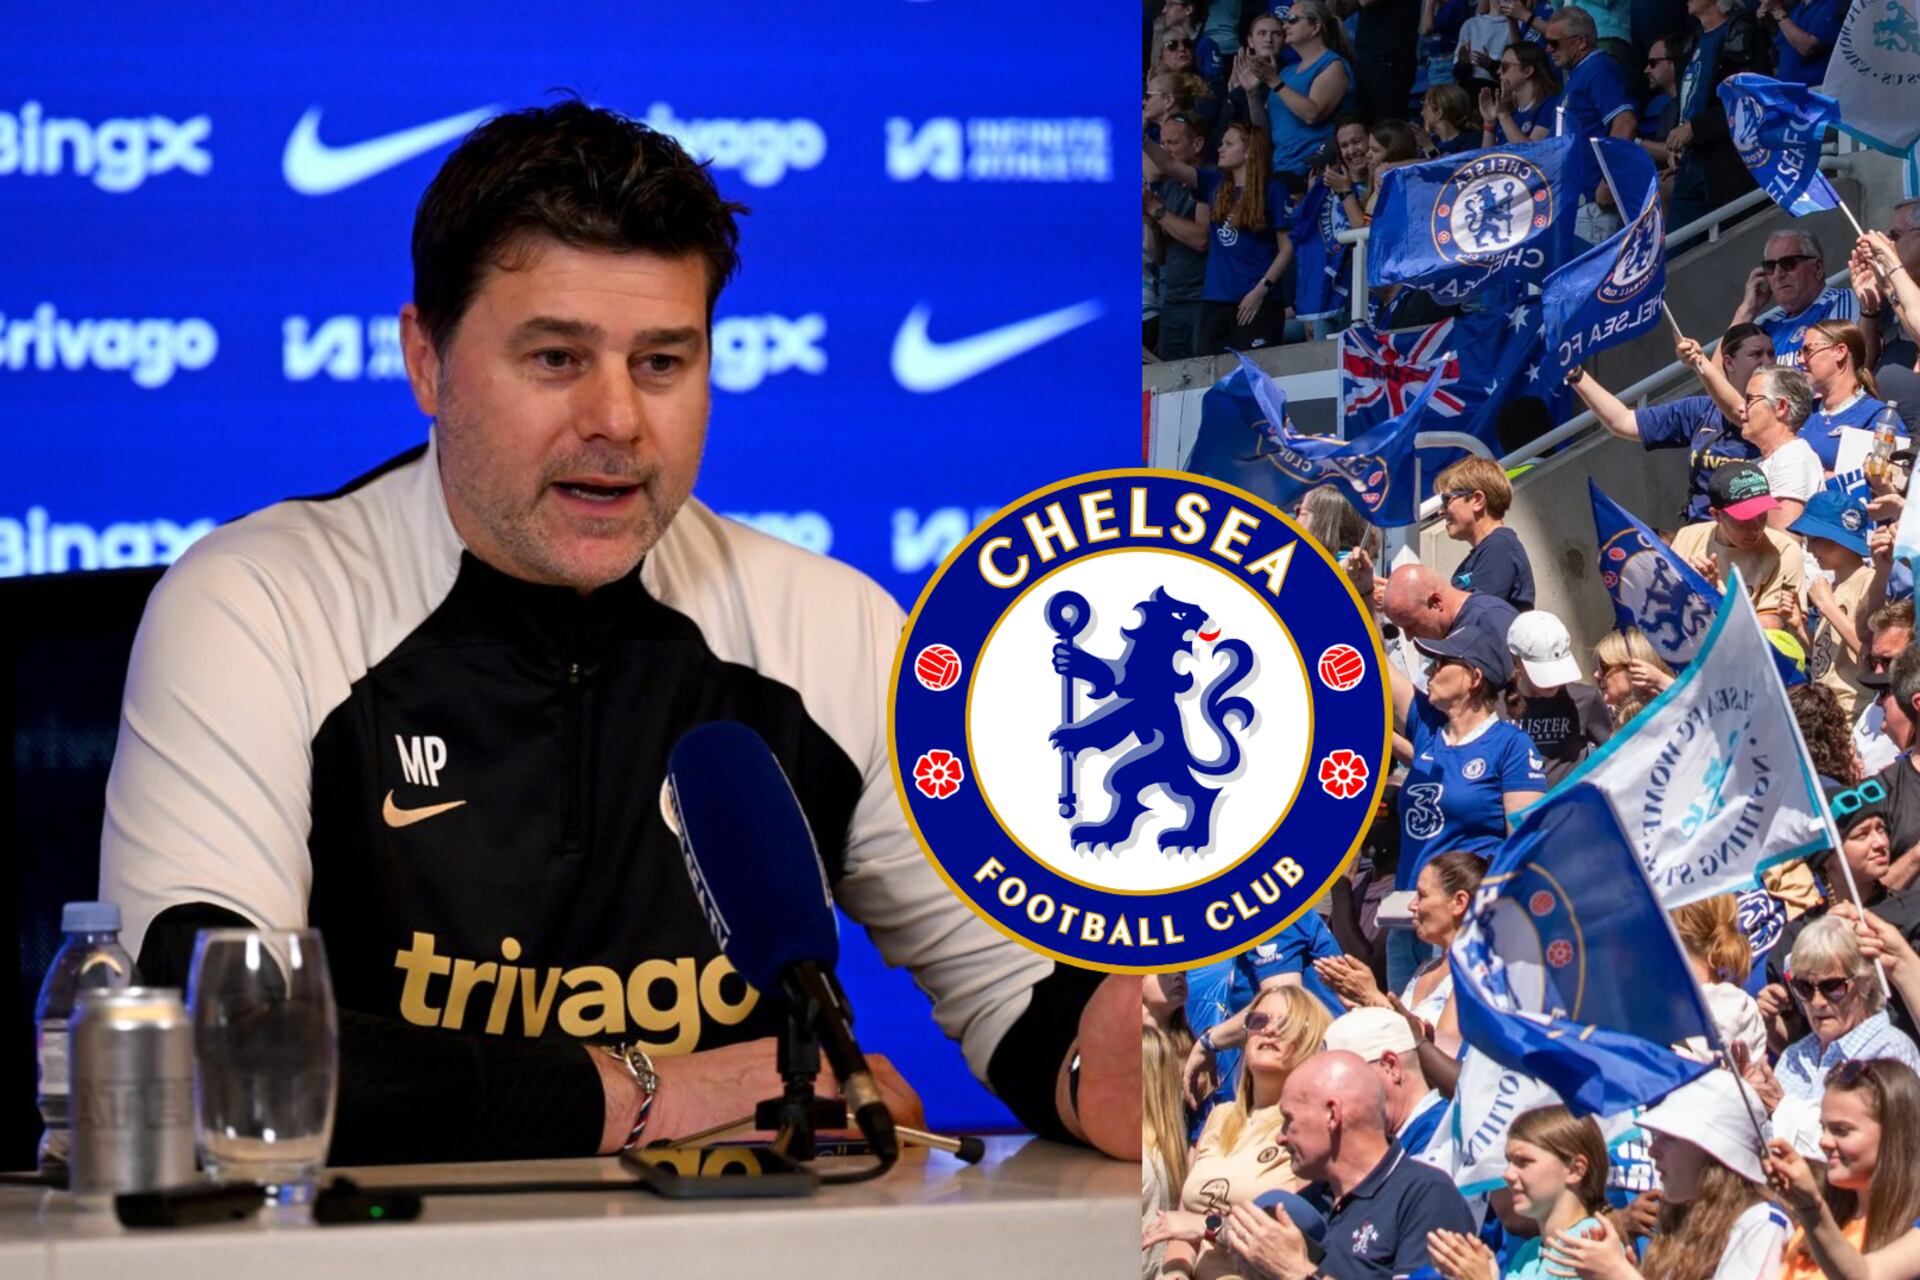 Pochettino staying? Chelsea coach's words that could mean he stays next season